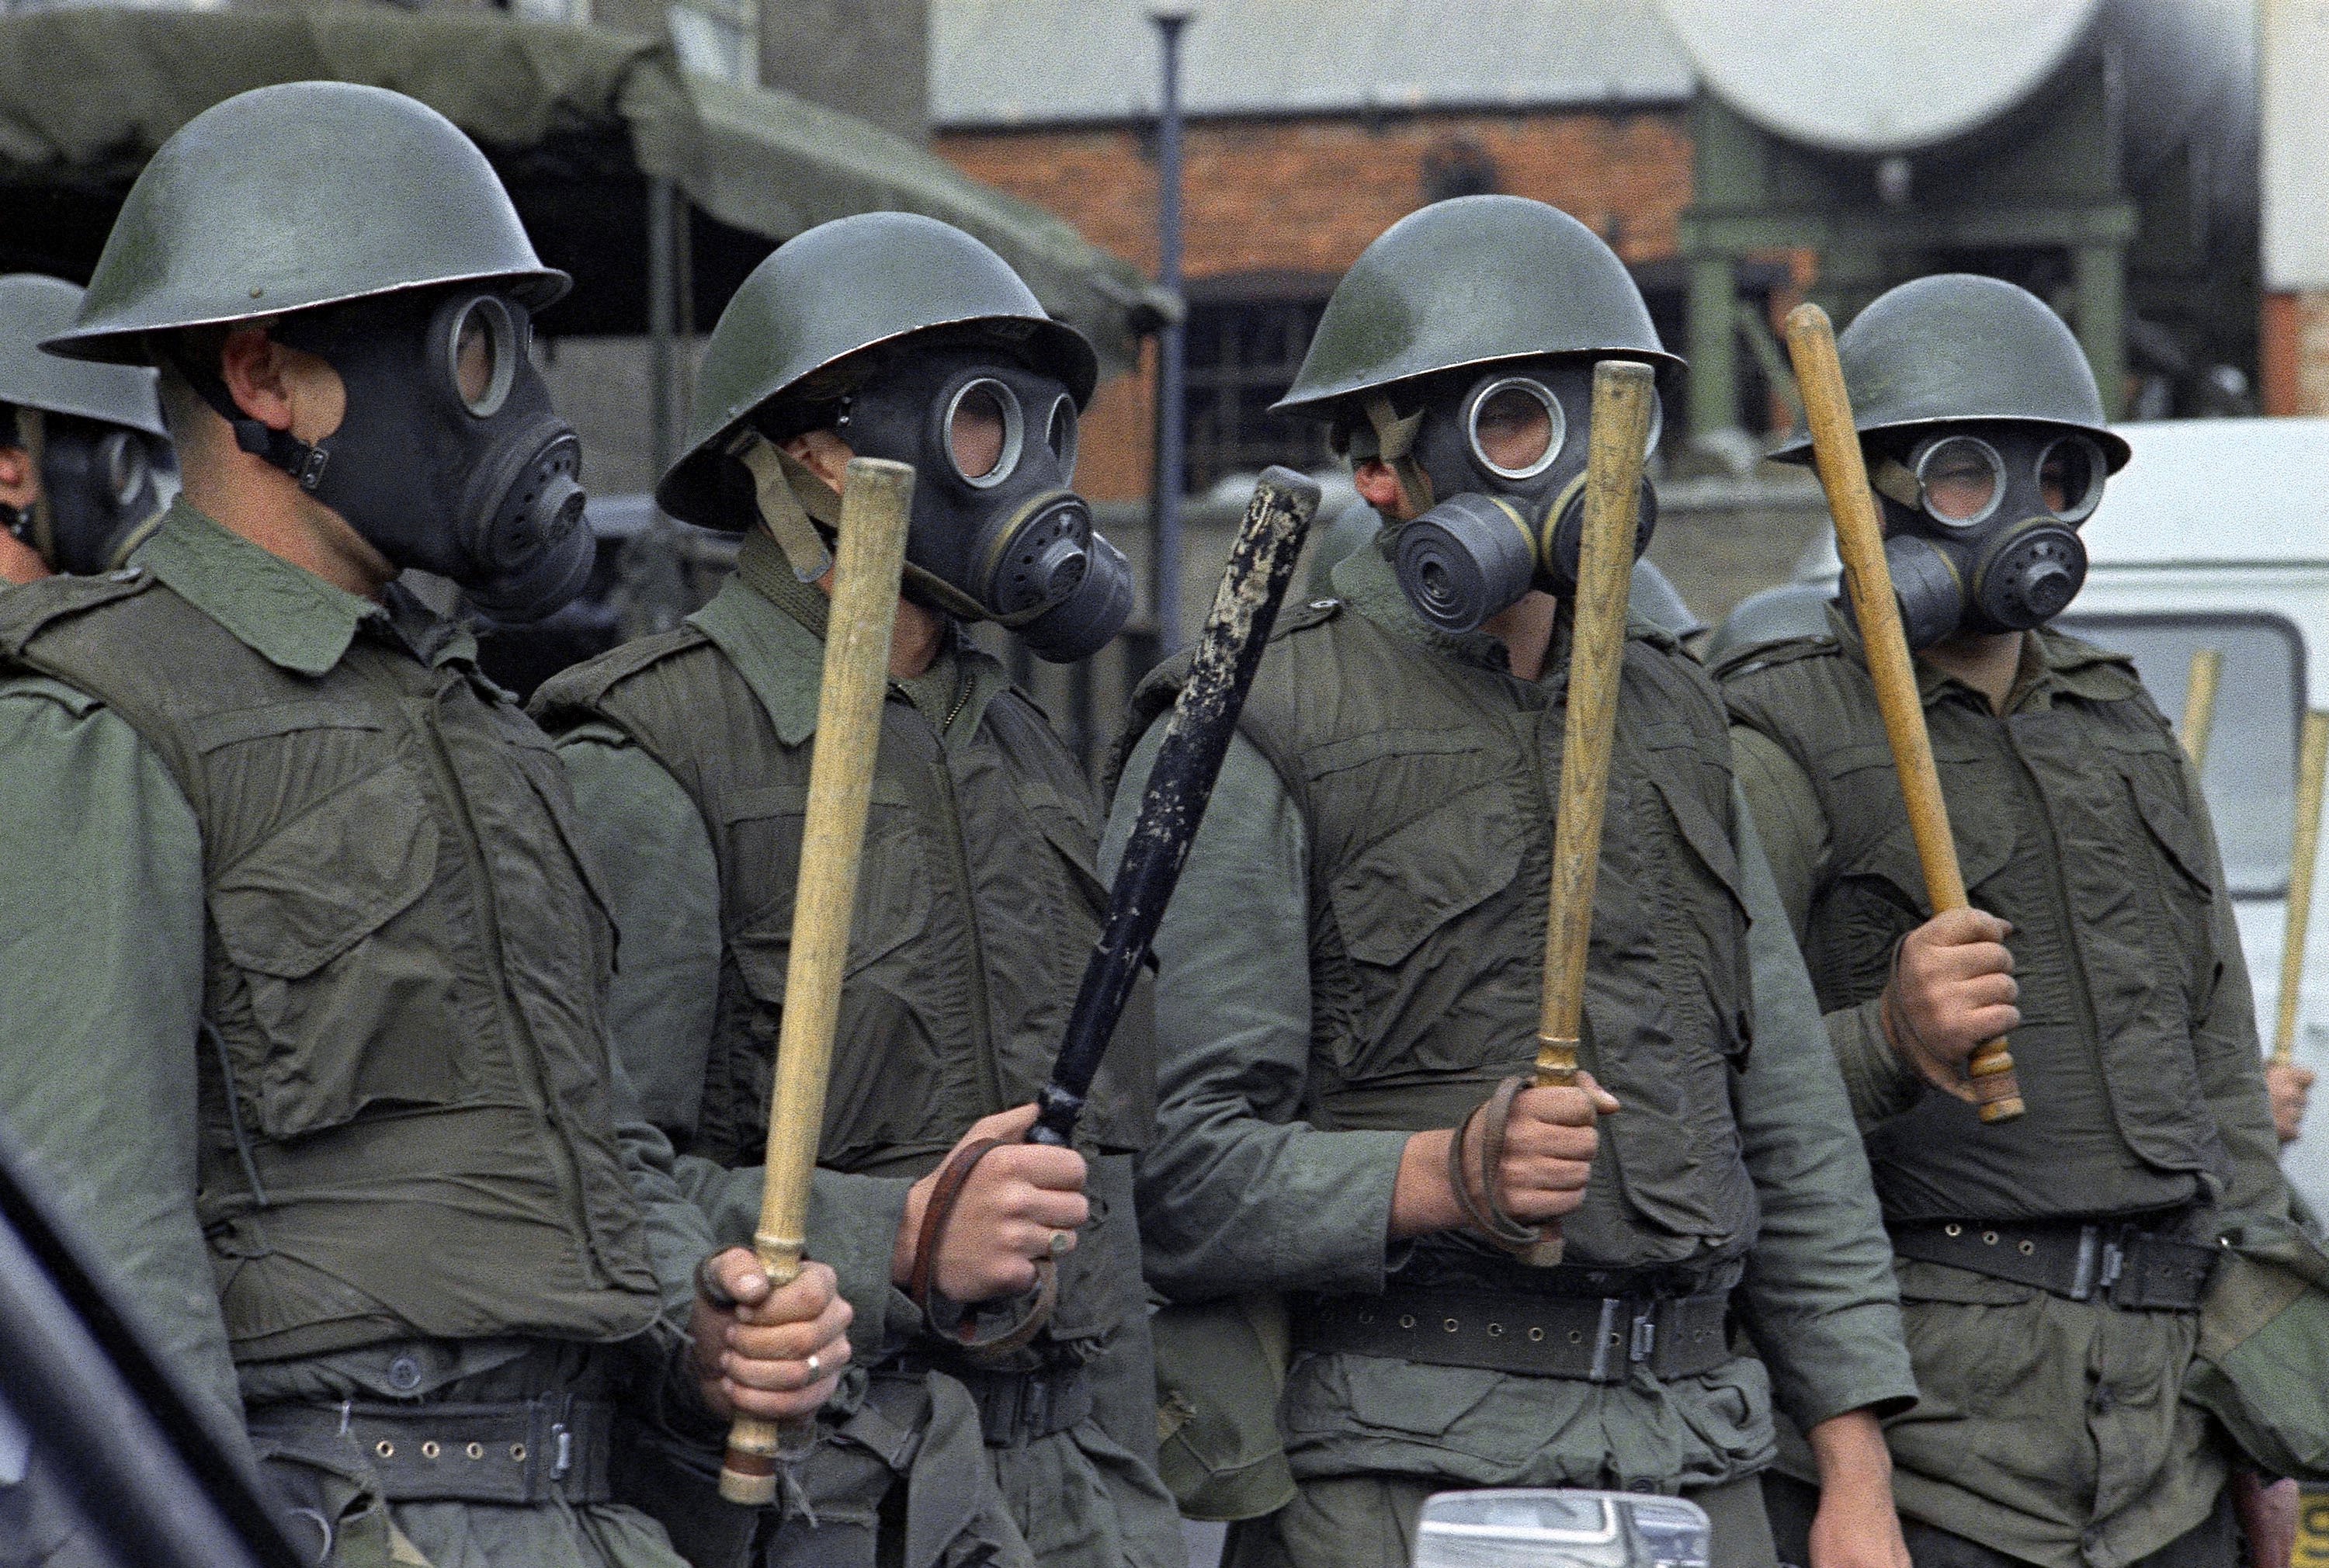 British Army Riot Squad troops wearing gas masks, bullet proof vests and wielding two foot long batons in Belfast